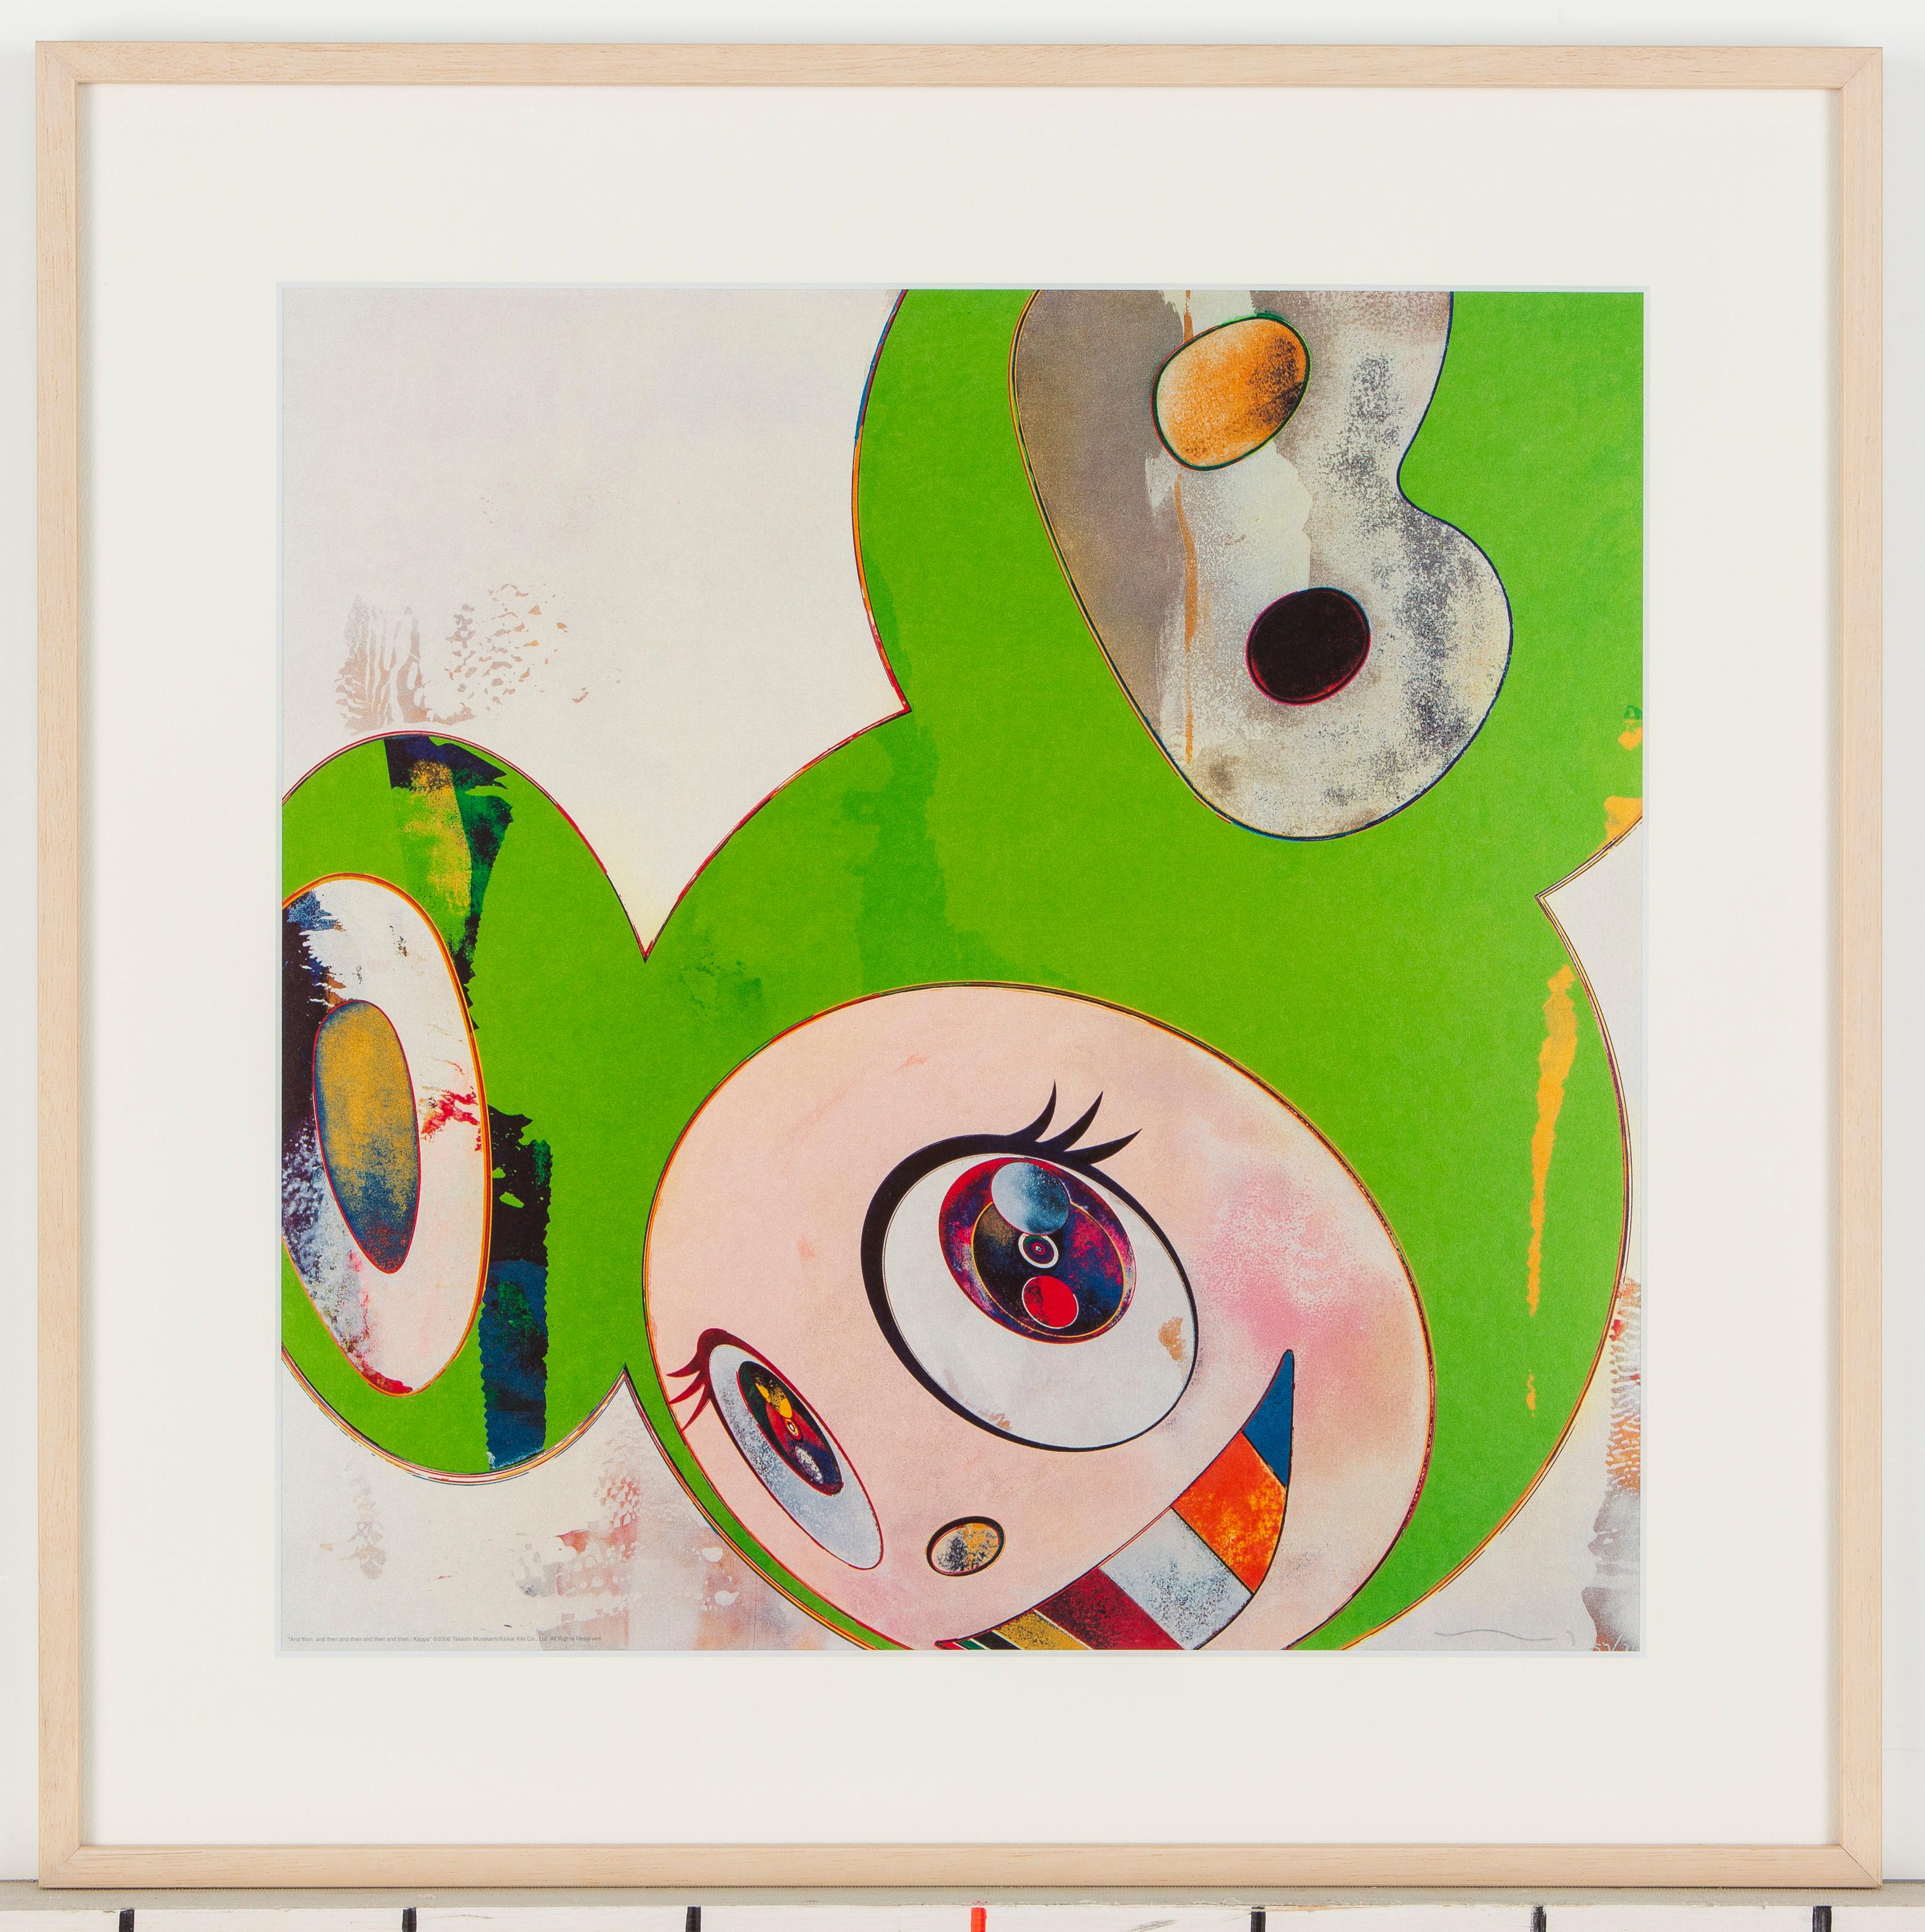 And then, and then and then and then and then/Kappa, 2006 by Takashi Murakami
Offset print, in silver ink signed and numbered by the artist
19 ³/₈ × 19 ³/₈ in
49.2 × 49.2 cm
Edition 57/300

The design for Mr. DOB was inspired by several animated